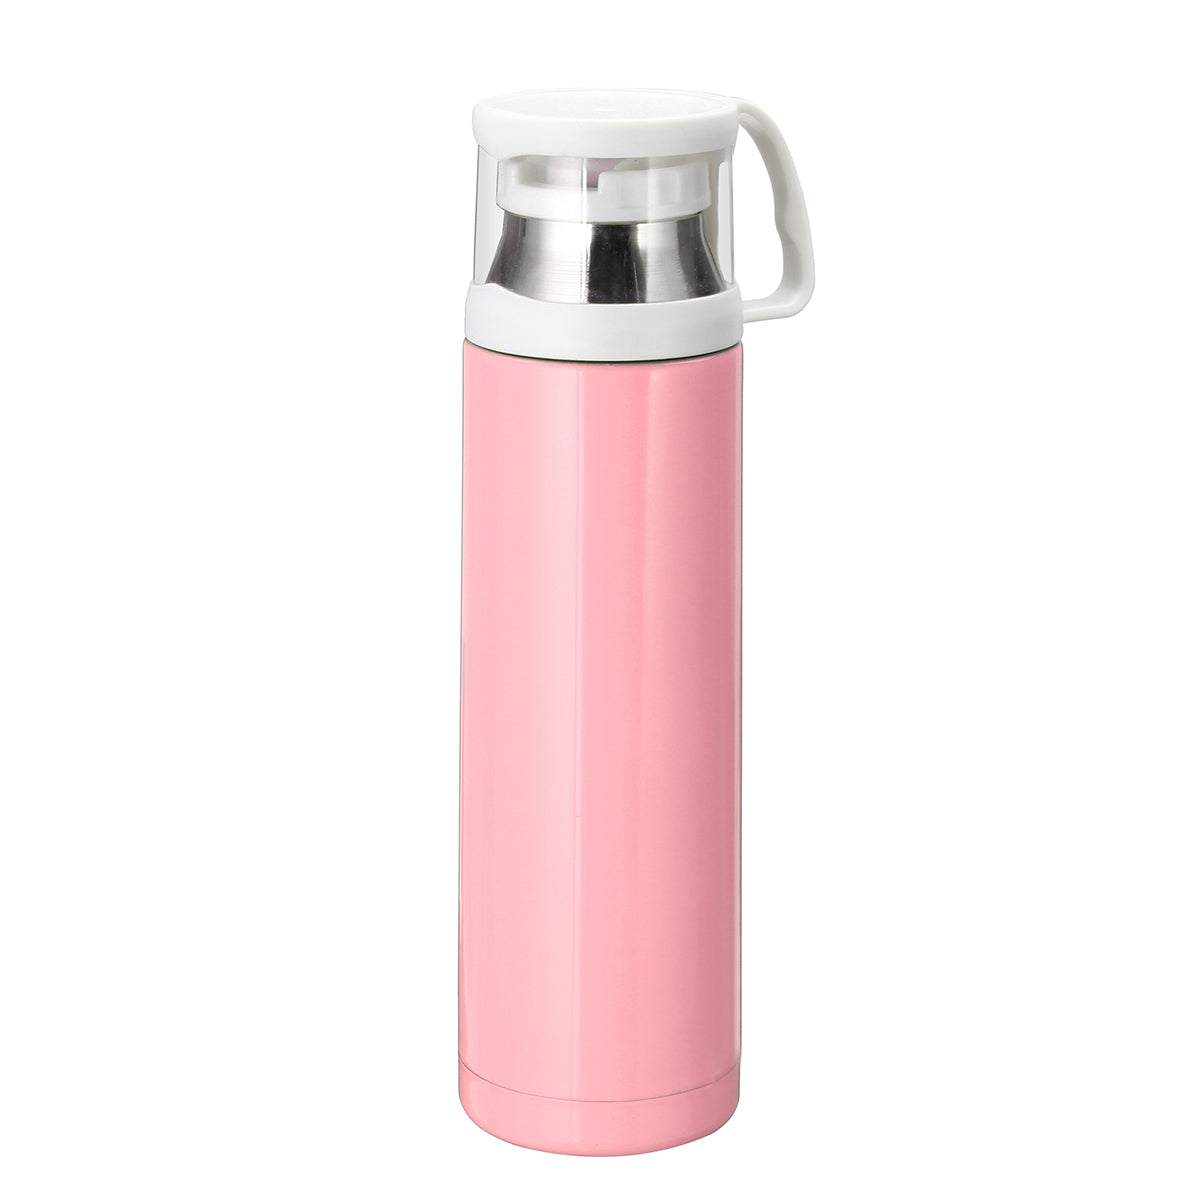 BIKIGHT 500ml 304 Stainless Steel Water Bottle Insulation Cup Thermal Cup Camping Riding Hunting